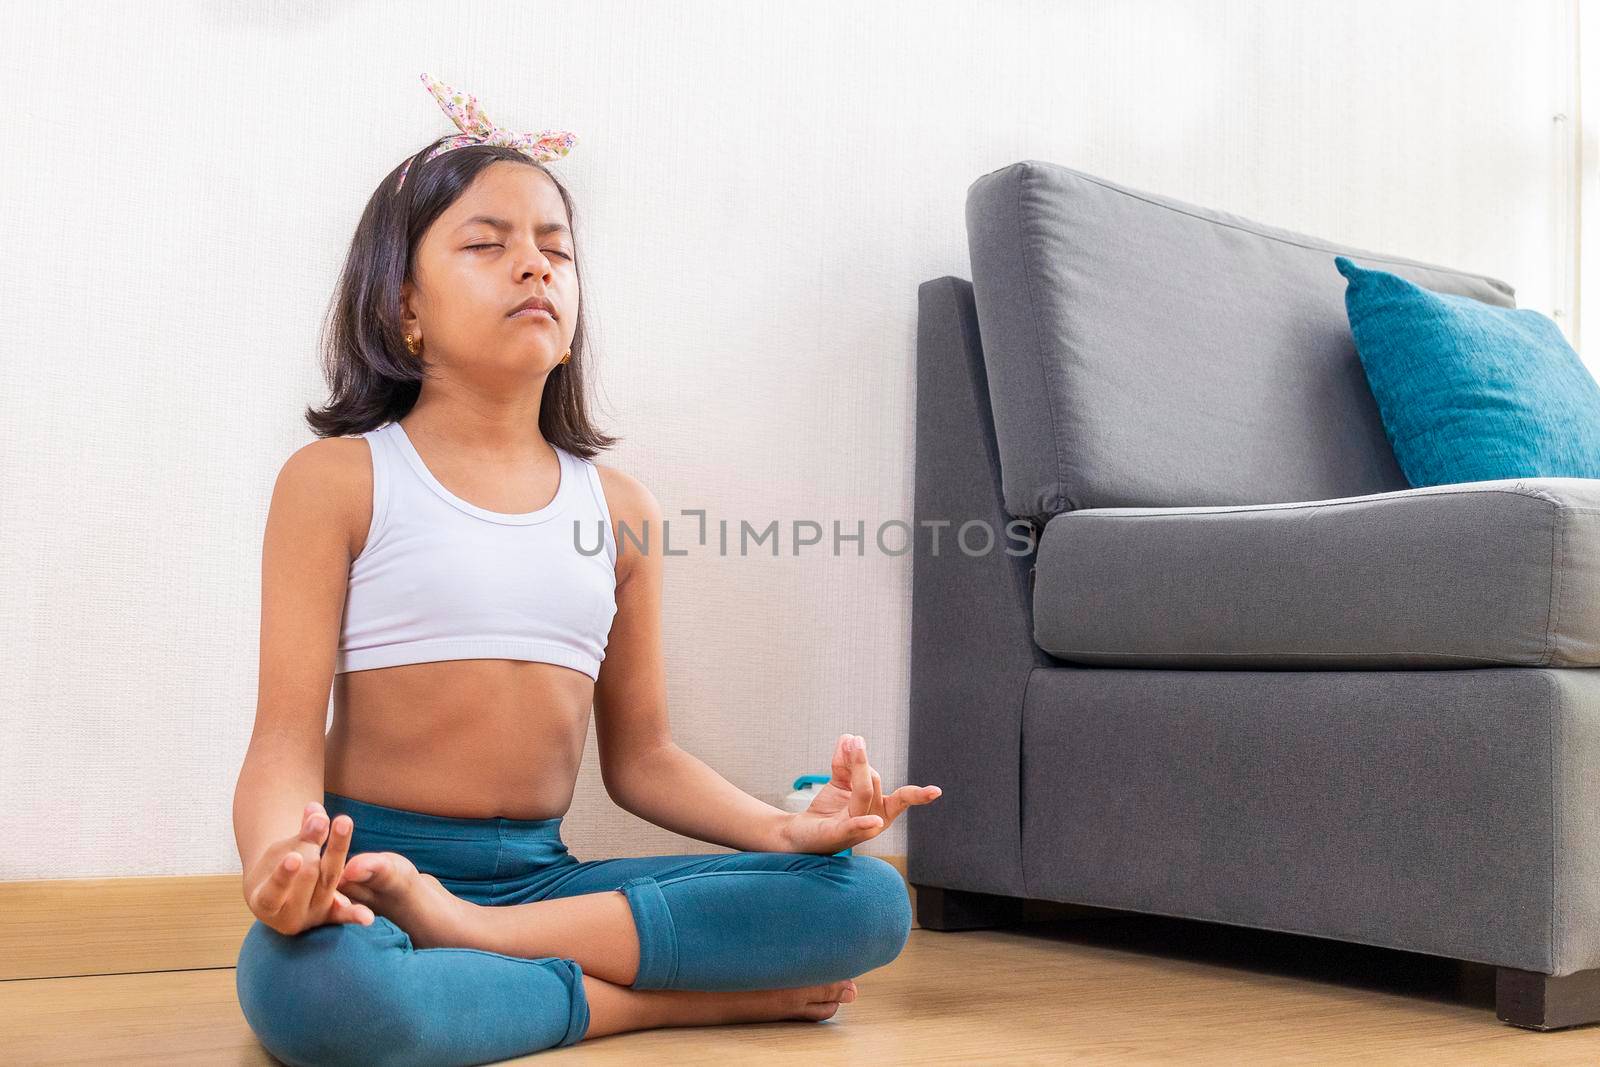 Teen girl doing yoga at home by eagg13